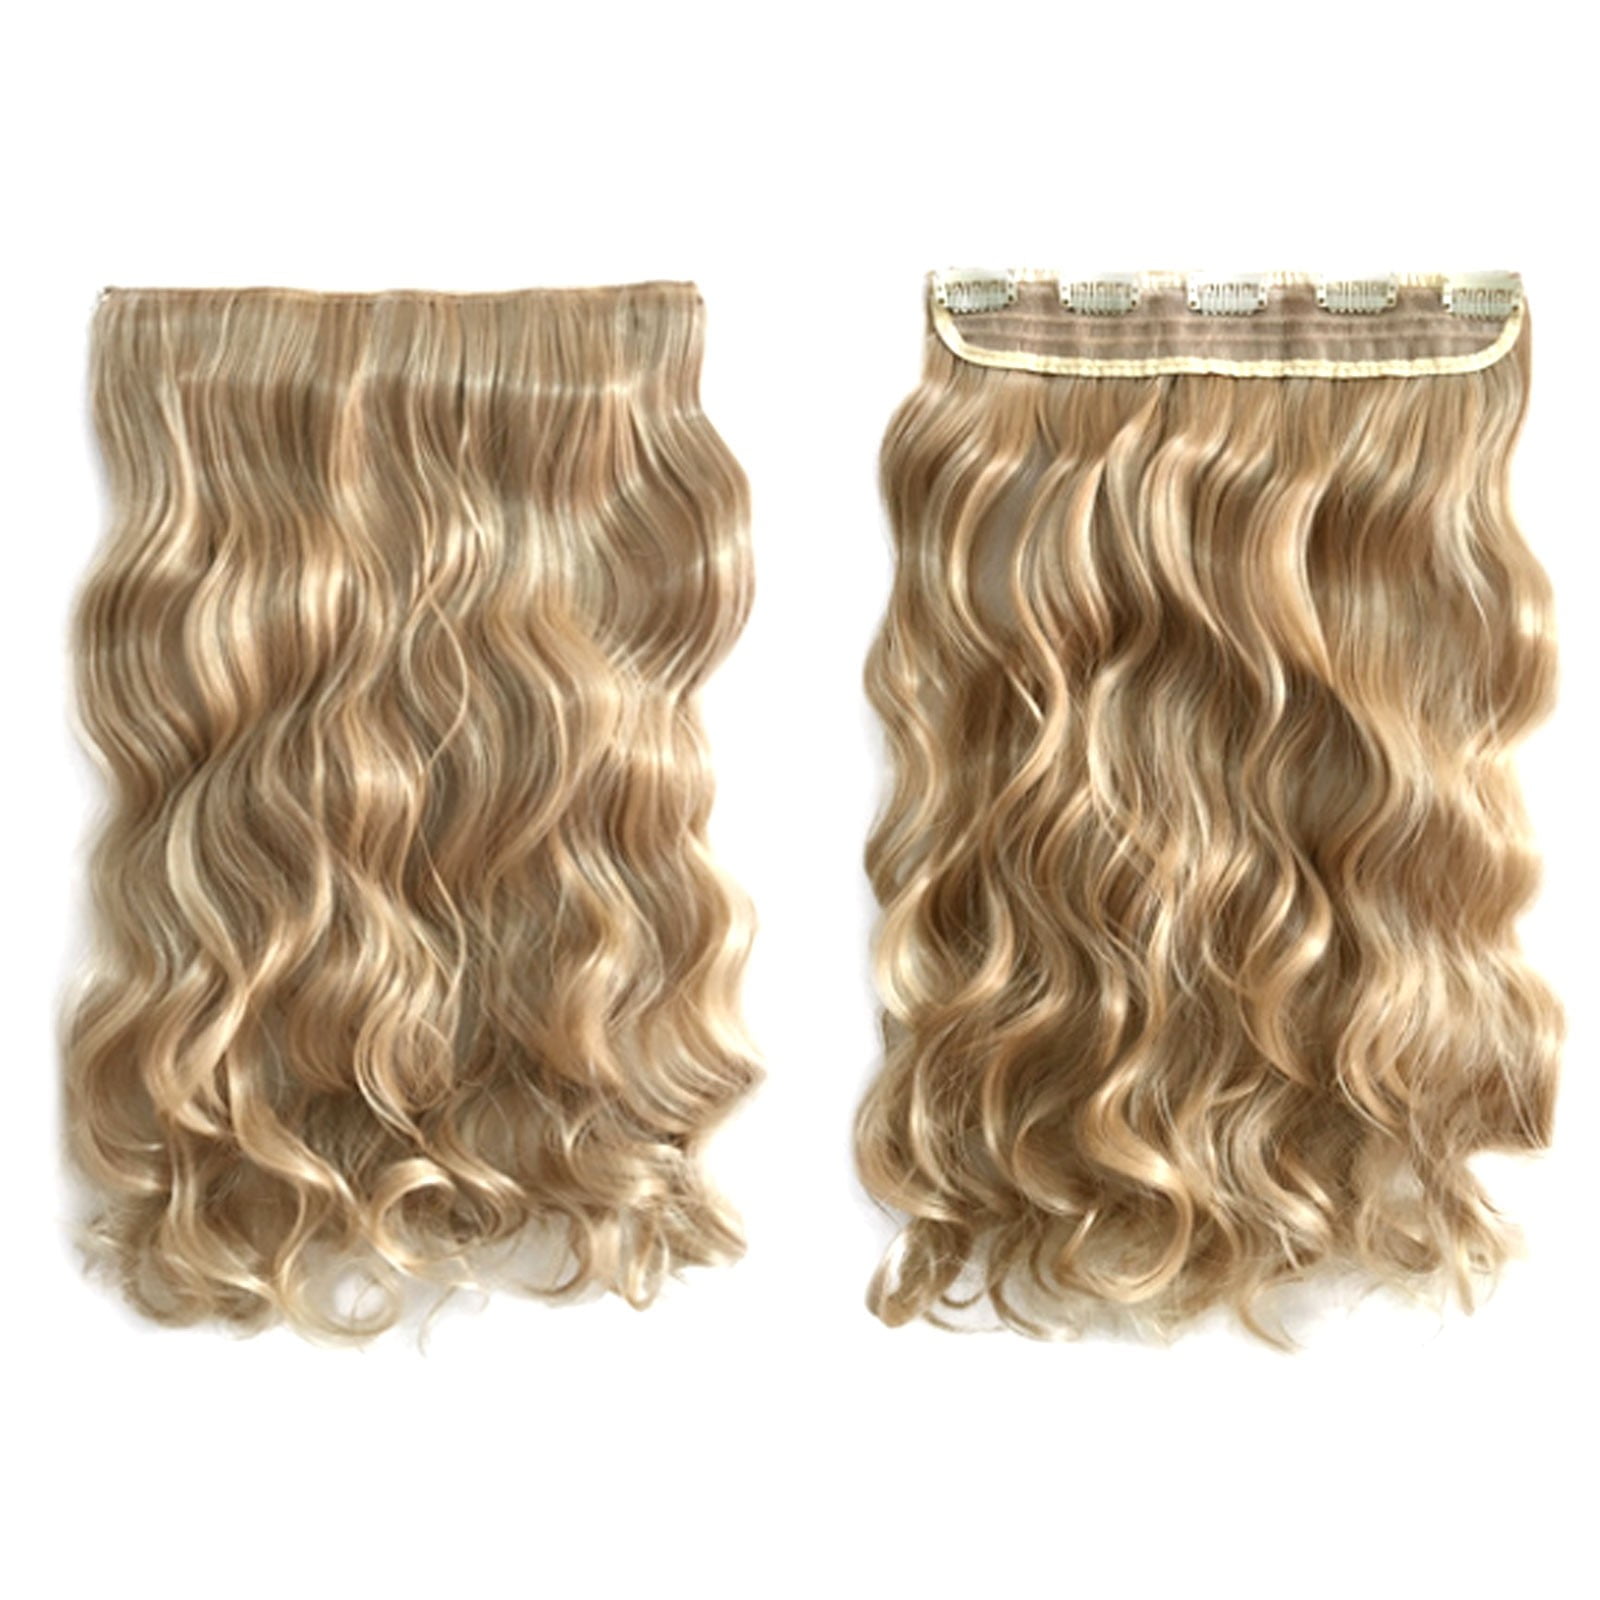 WOXINDA Copper Hair Color Thin Hair This Product Is A 22 Inch Long